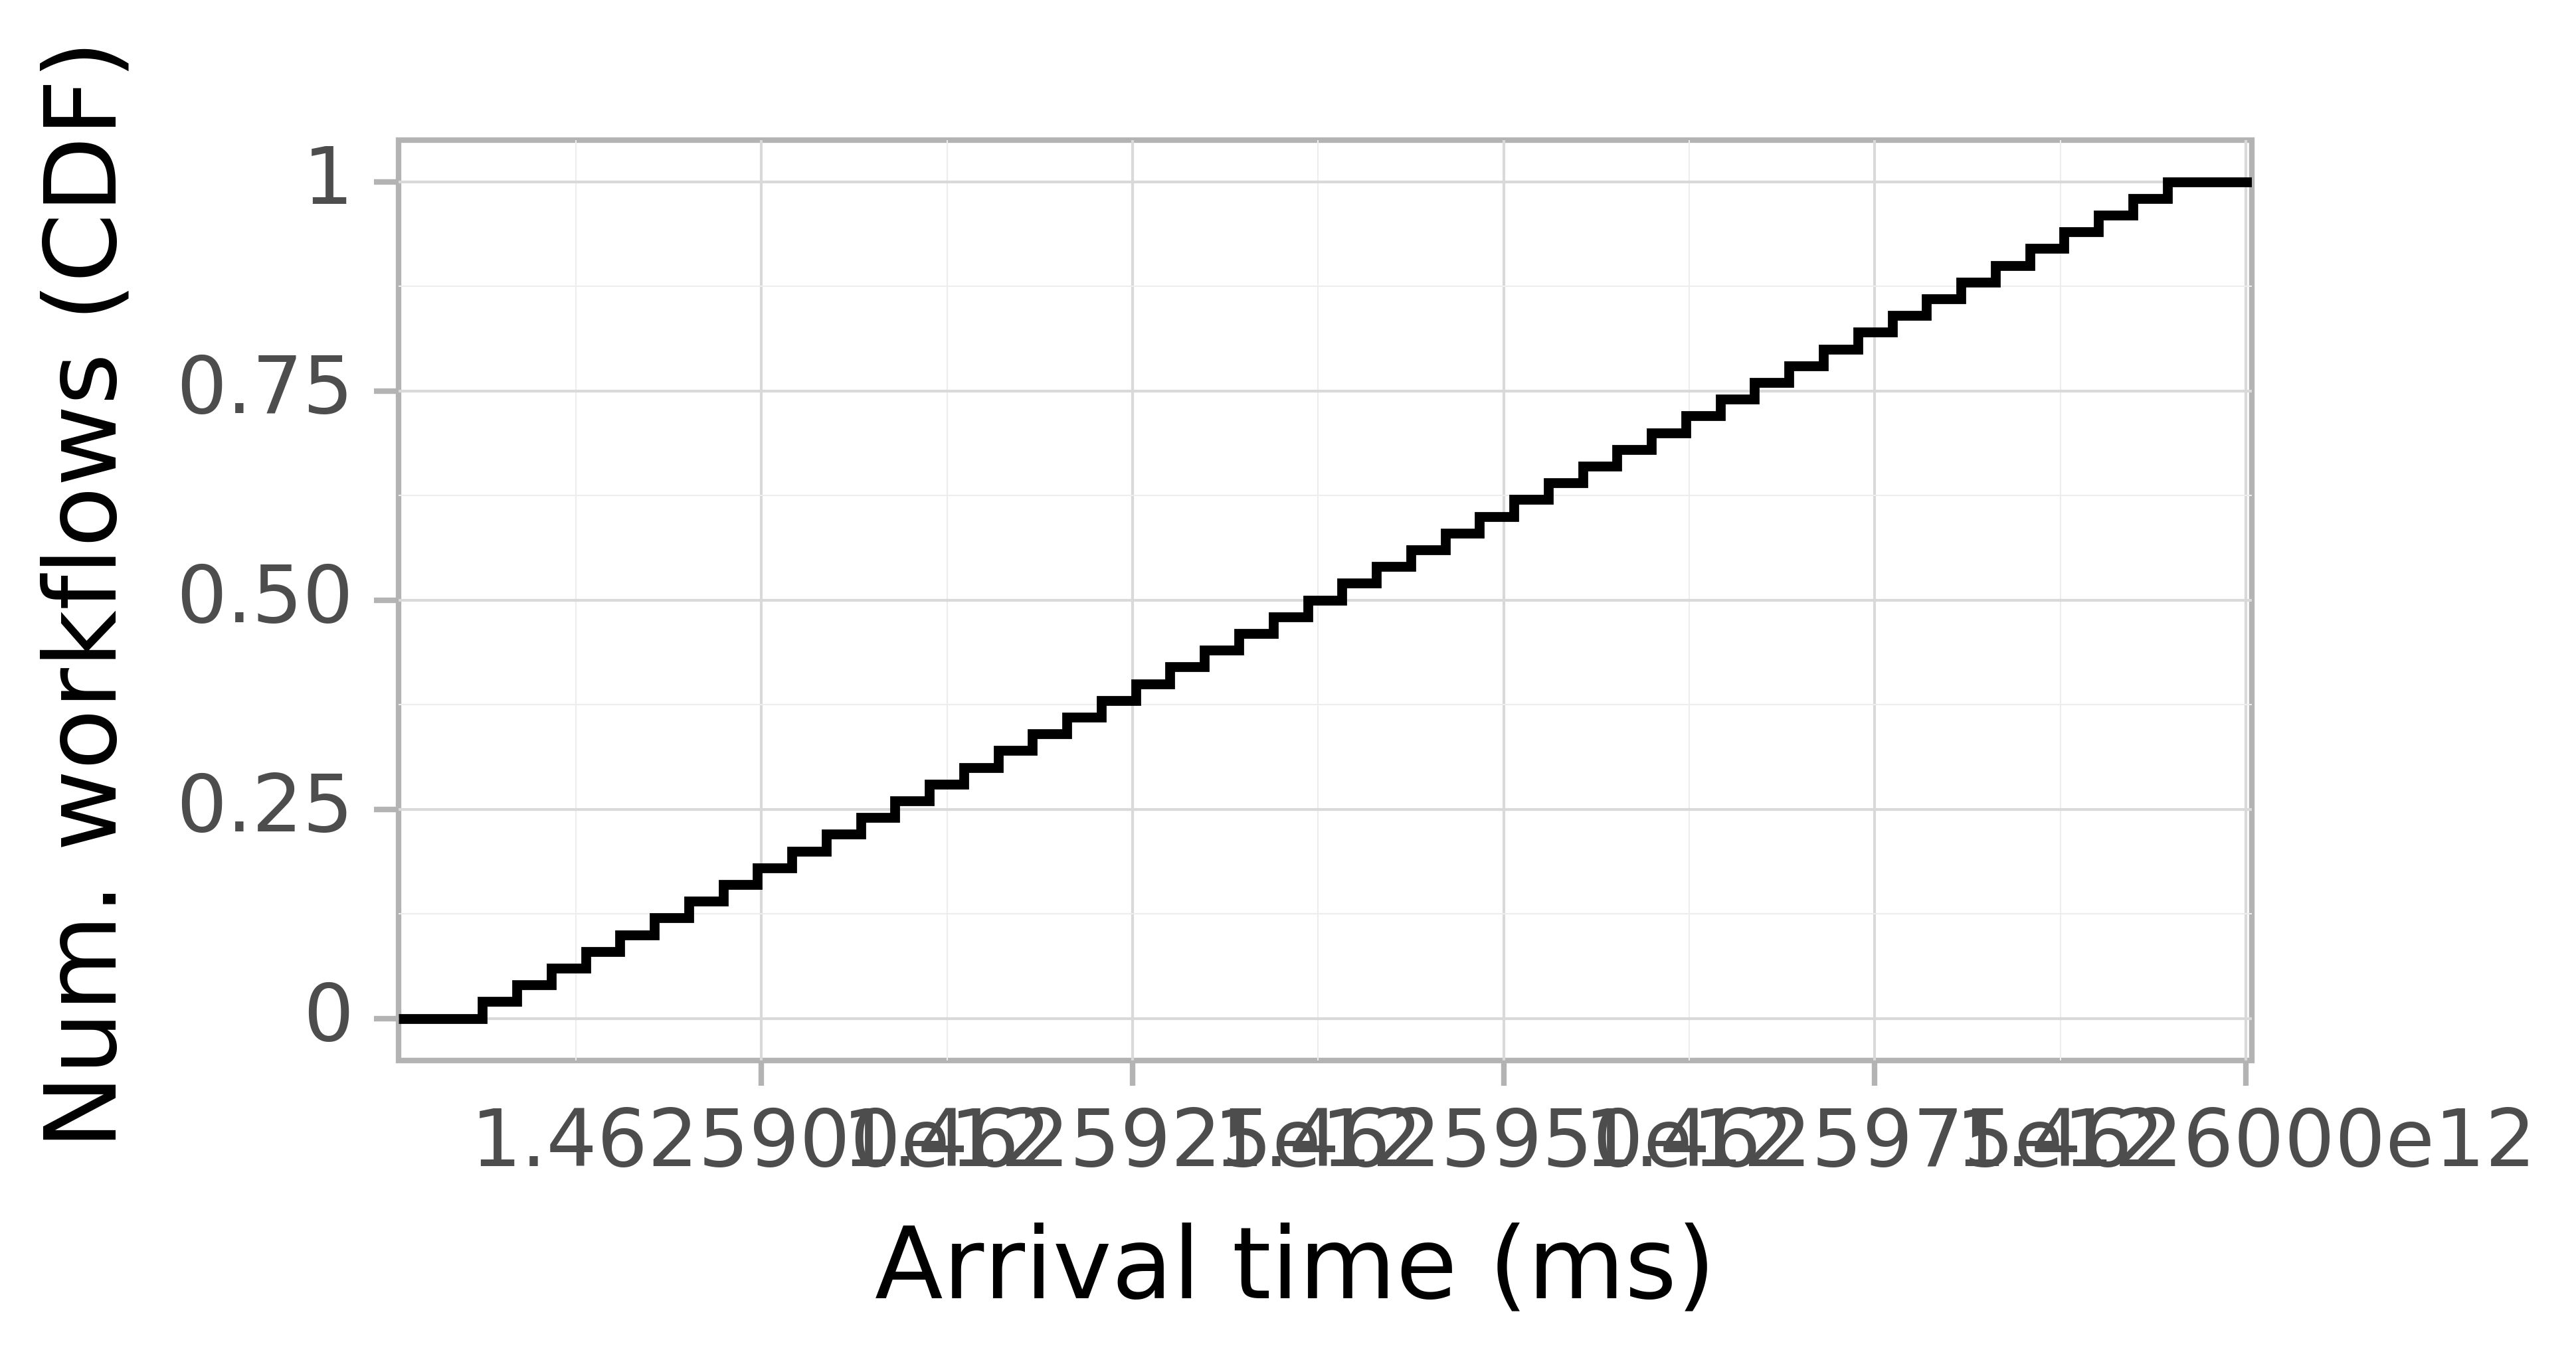 Job arrival CDF graph for the askalon-new_ee43 trace.